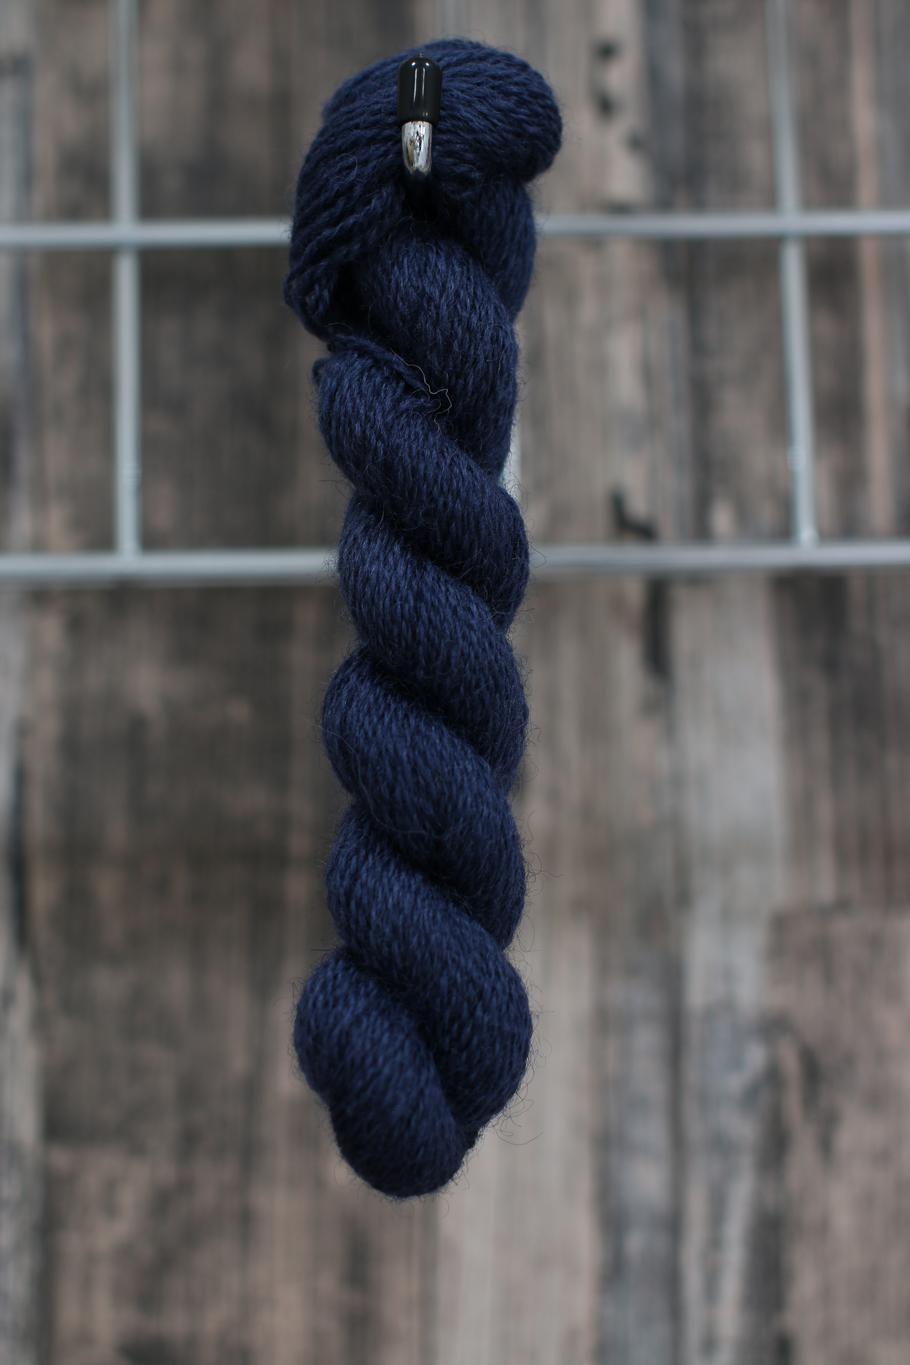 A Skein of dark blue wool hanging from  a hook